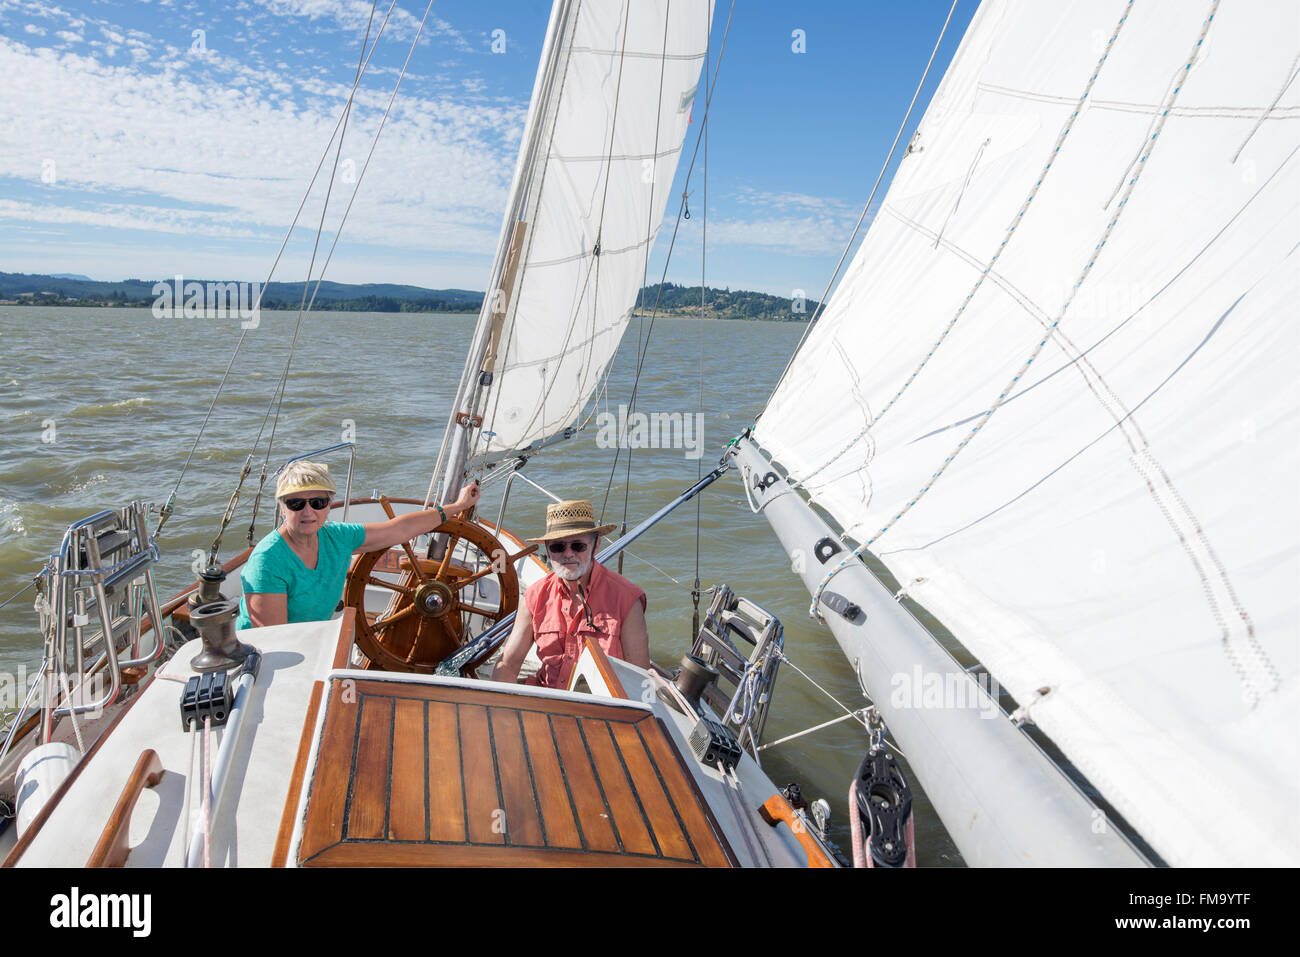 A happy senior couple enjoys time together sailing on a lake on a fine summer day. Stock Photo